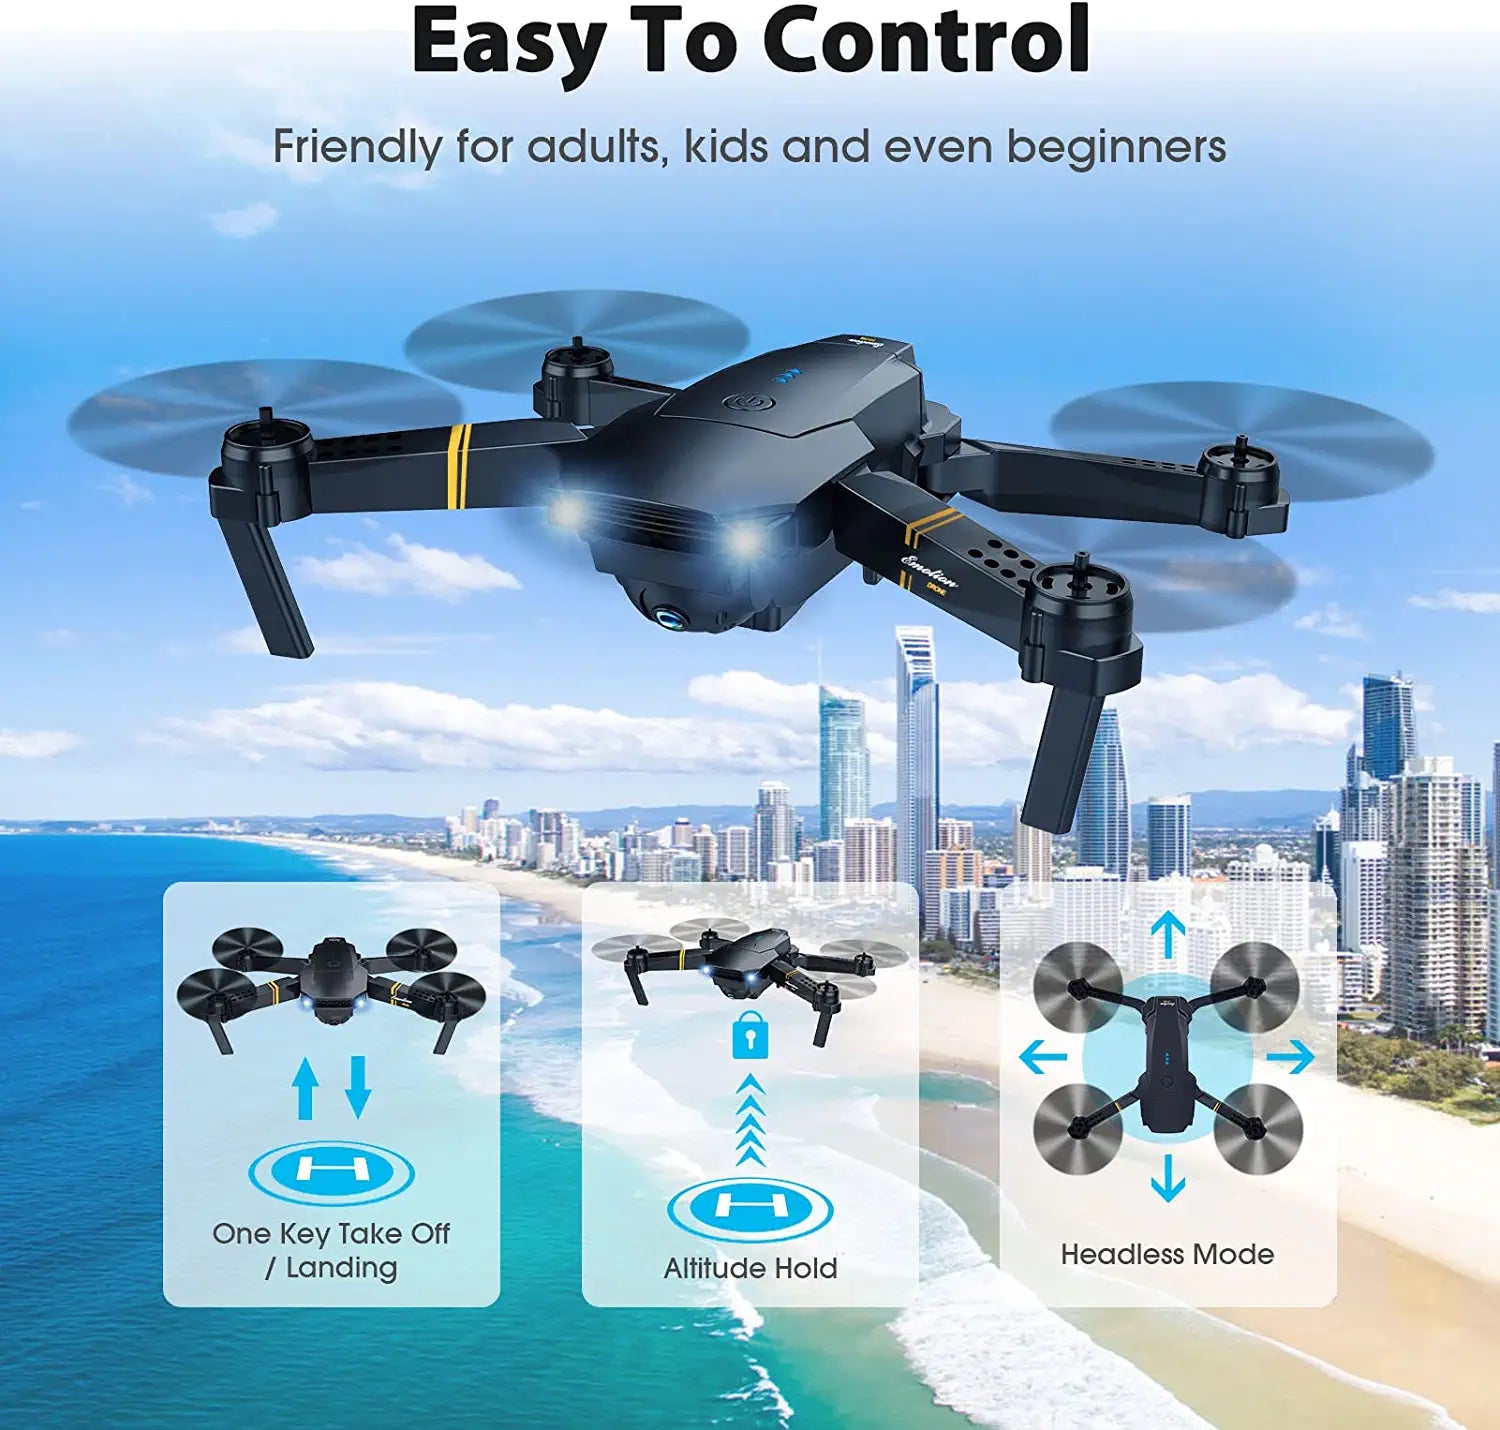 Fpv Drone With 1080P Camera 2.4G Wifi Fpv Rc Quadcopter With Headless Mode, Follow  Me, Altitude Hold, Toys Gifts For Kids Adults Christmas Gifts Children  Aircraft 